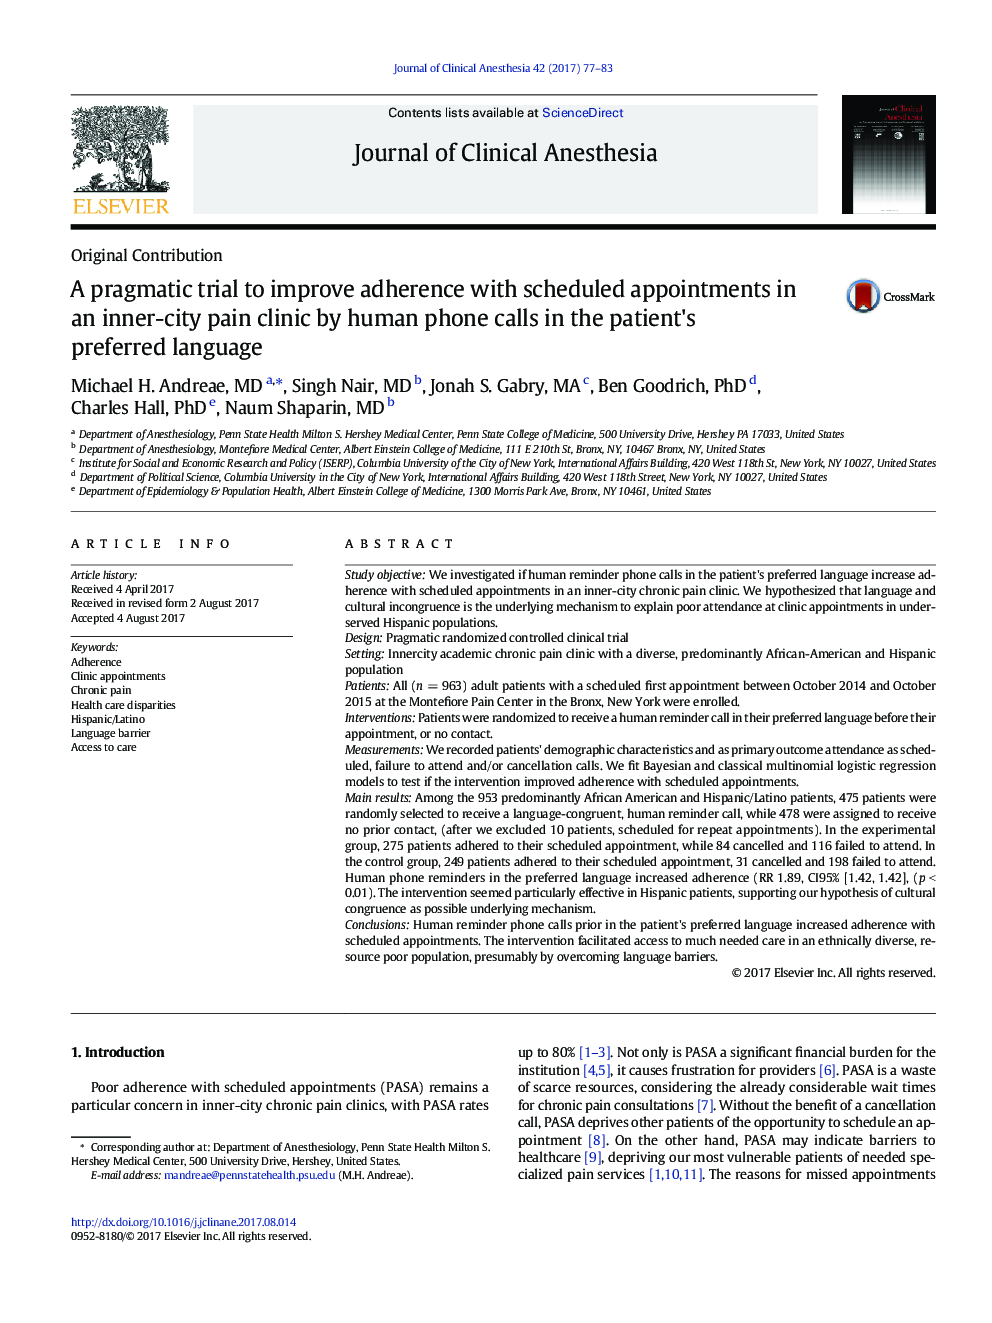 A pragmatic trial to improve adherence with scheduled appointments in an inner-city pain clinic by human phone calls in the patient's preferred language